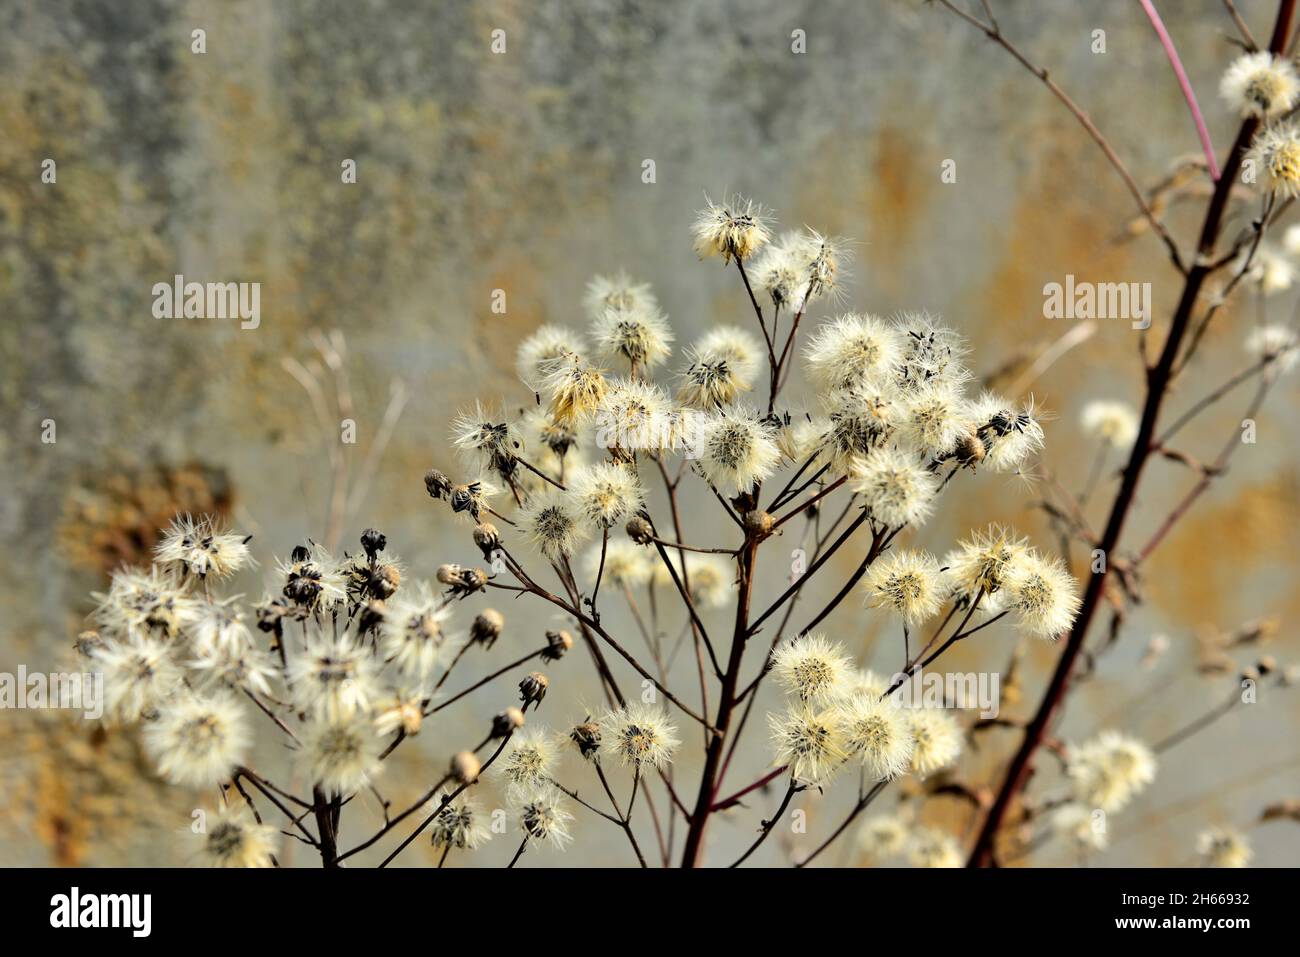 Natural roadside wild weed seed heads in front of abstract rusty steel background, UK Stock Photo